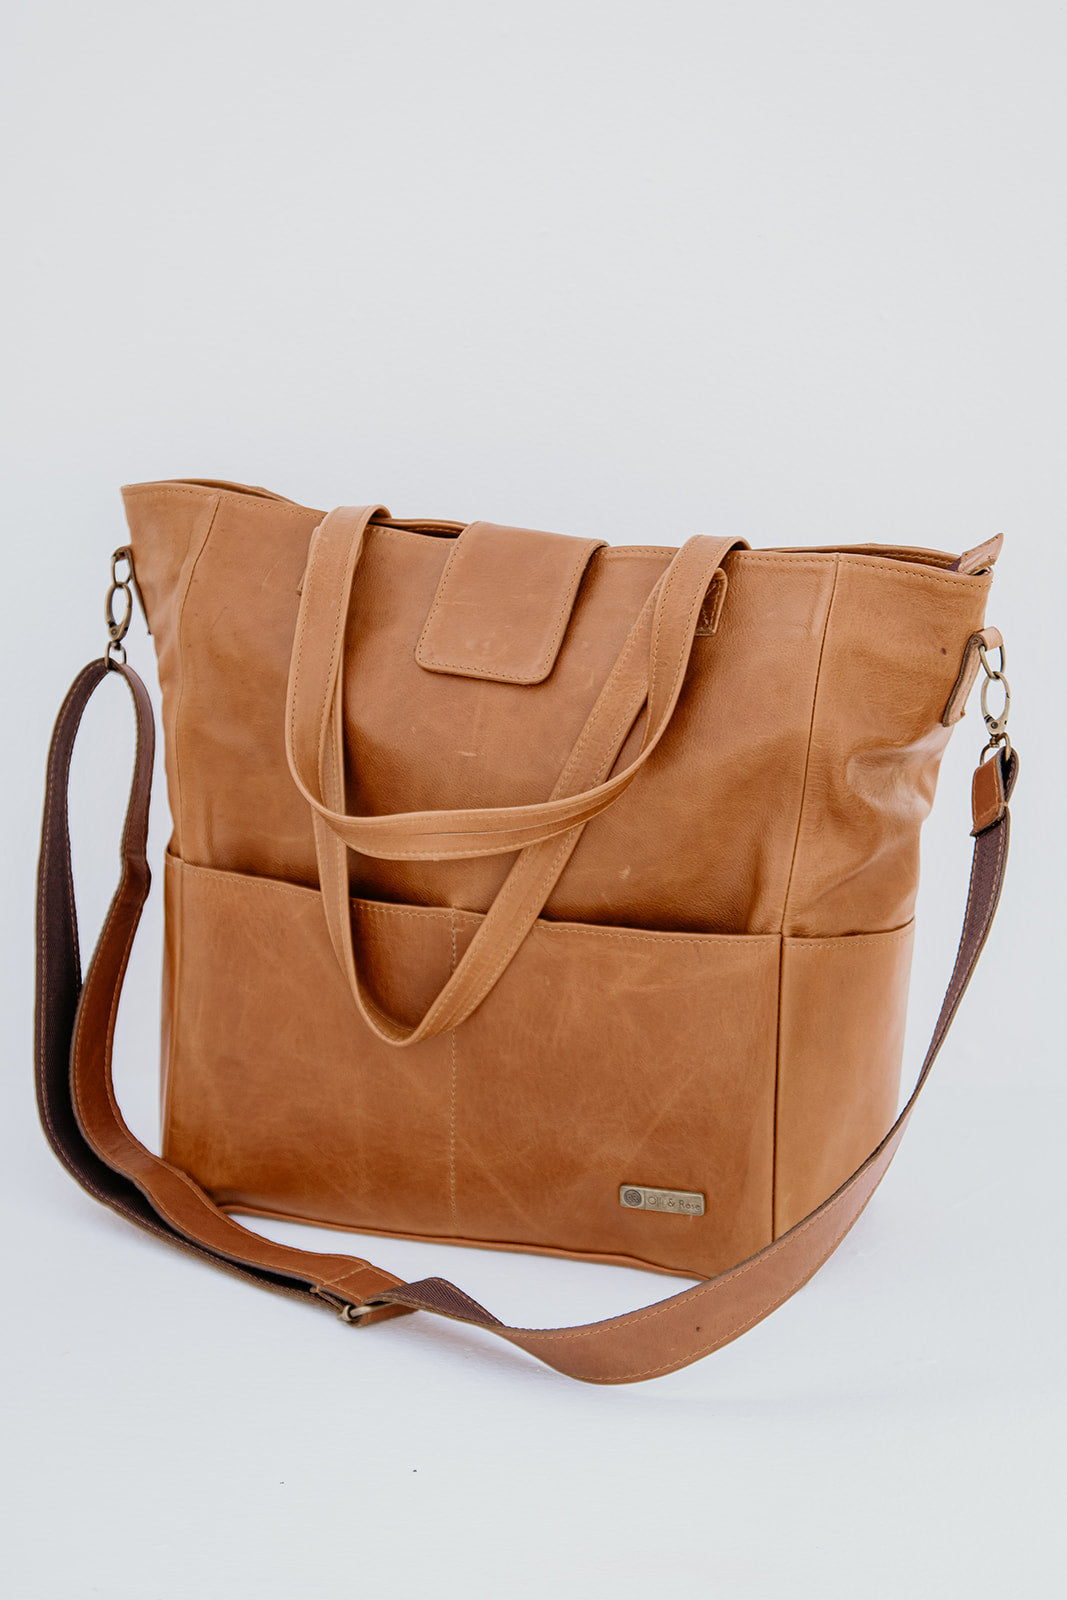 Leather Diaper Bags – Olli and Rose